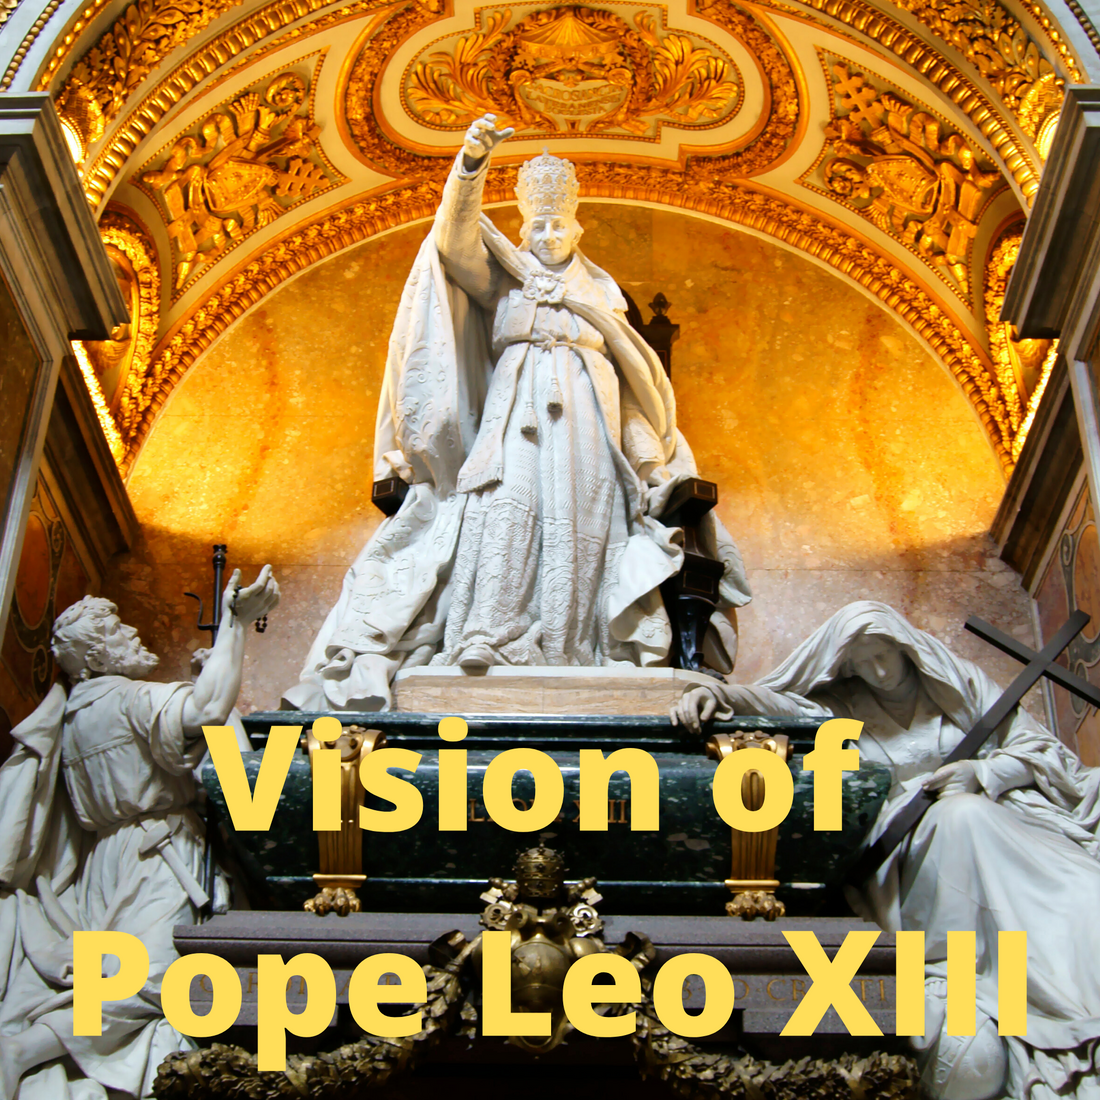 The Vision of Pope Leo XIII |God and the Devil chat